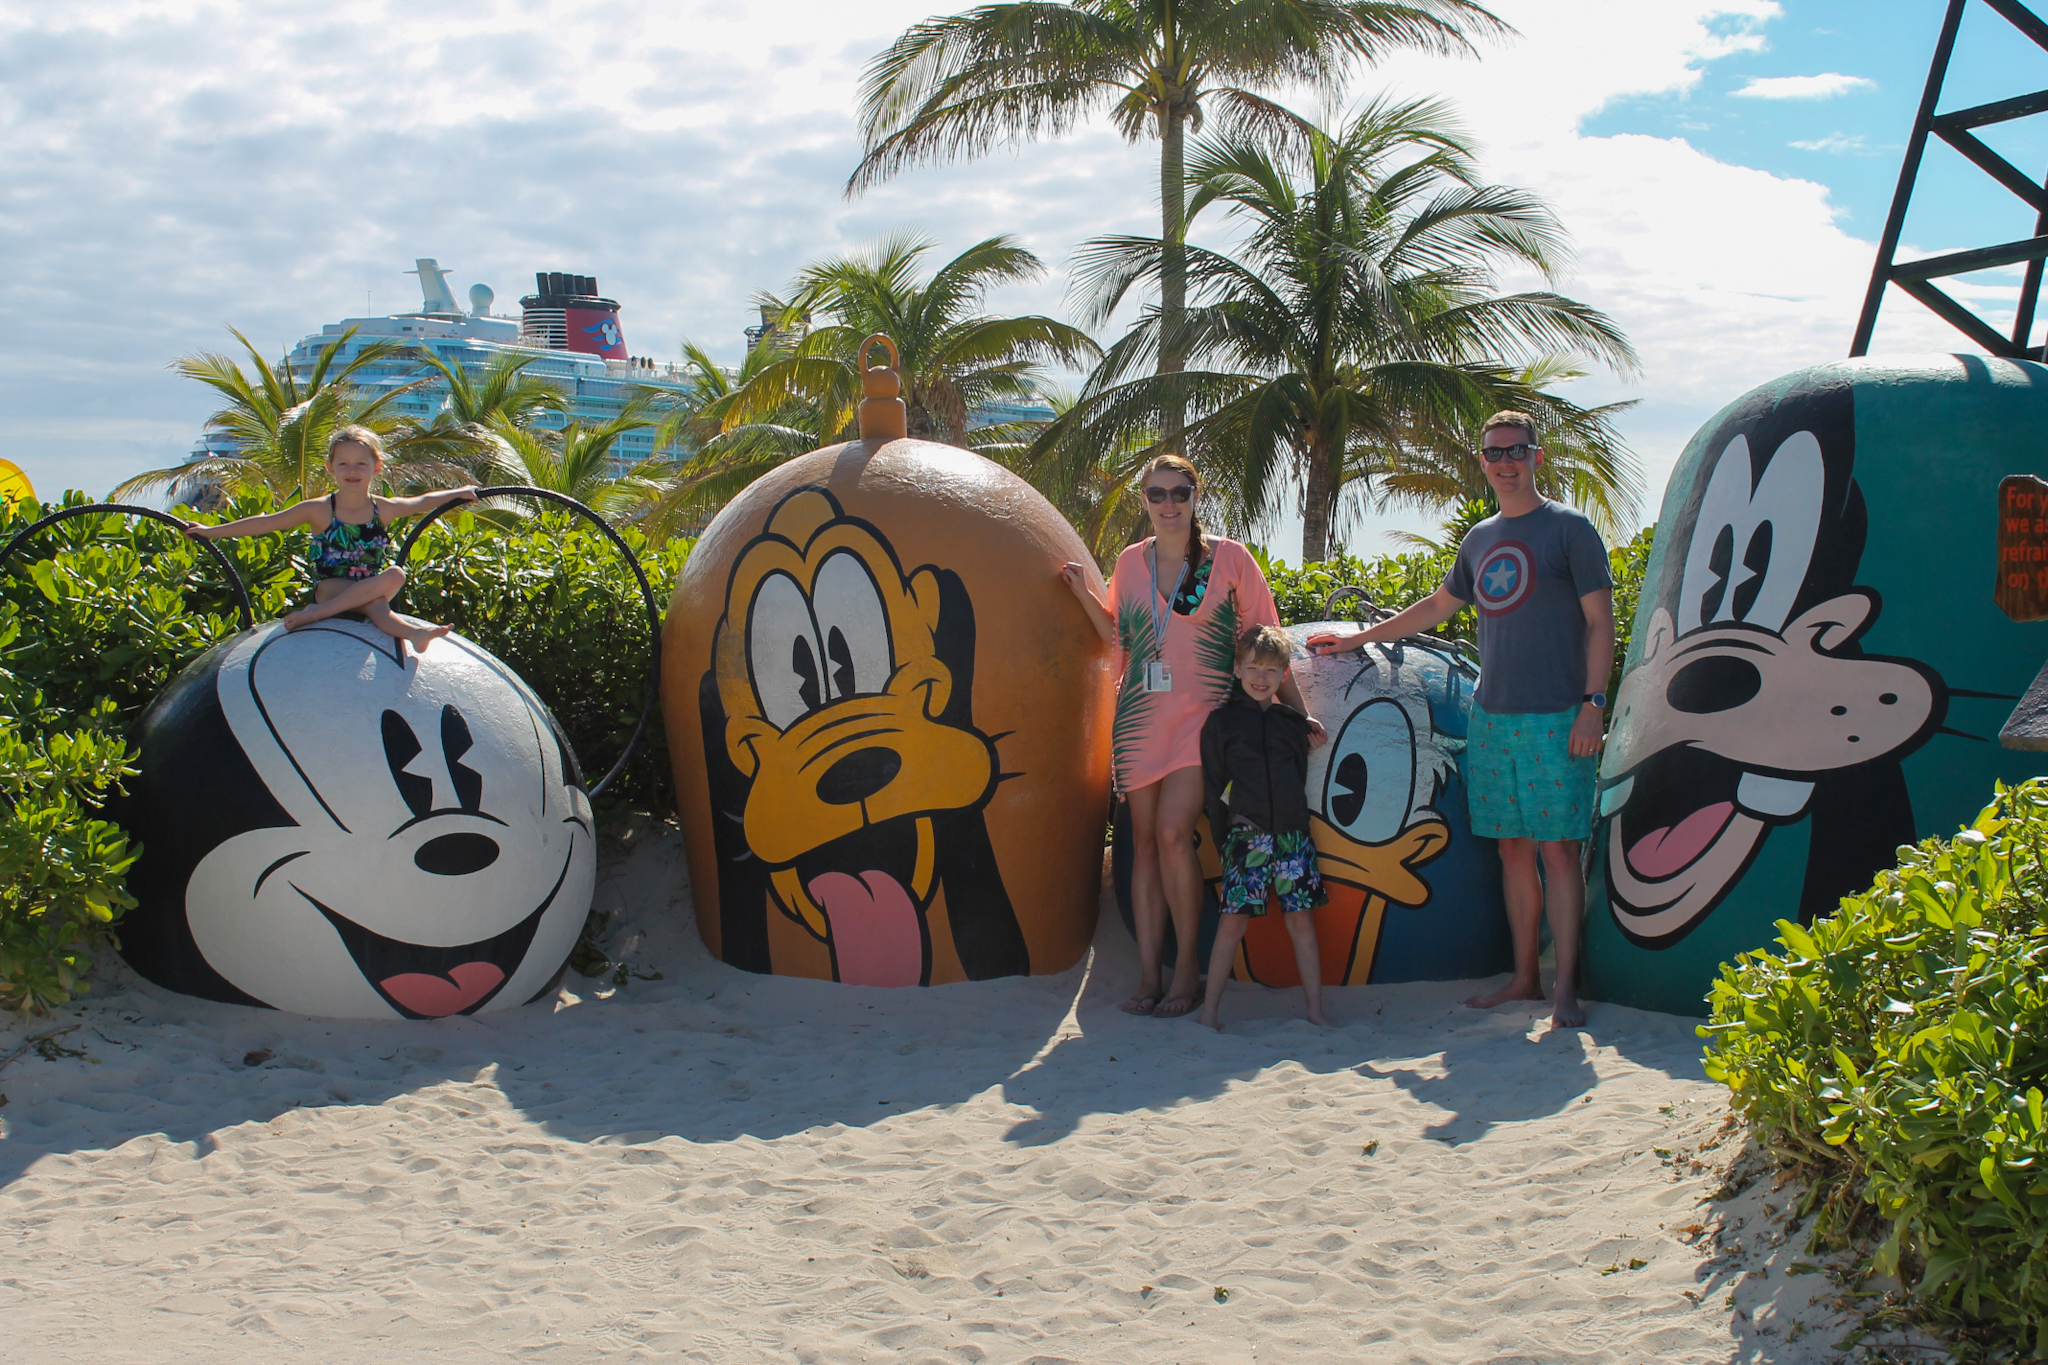 Disney Dream Day Three Castaway Cay - The Mommy Mouse Clubhouse